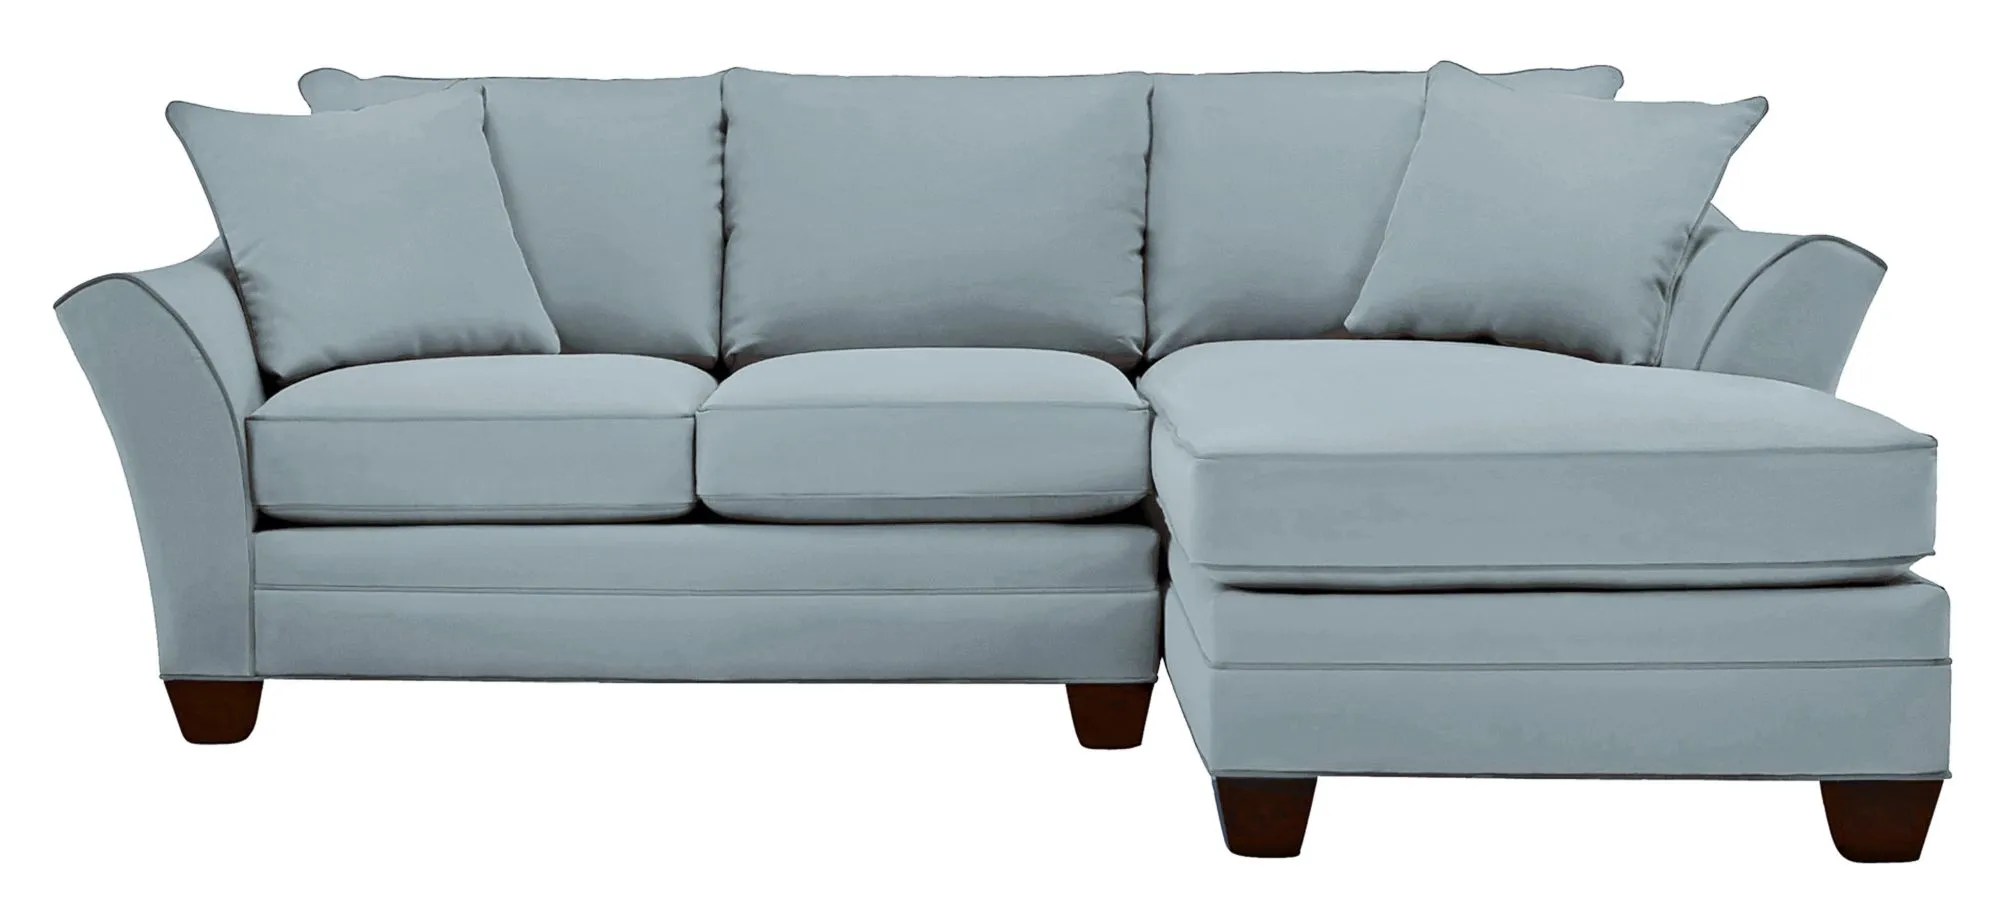 Foresthill 2-pc. Right Hand Chaise Sectional Sofa in Suede So Soft Hydra by H.M. Richards